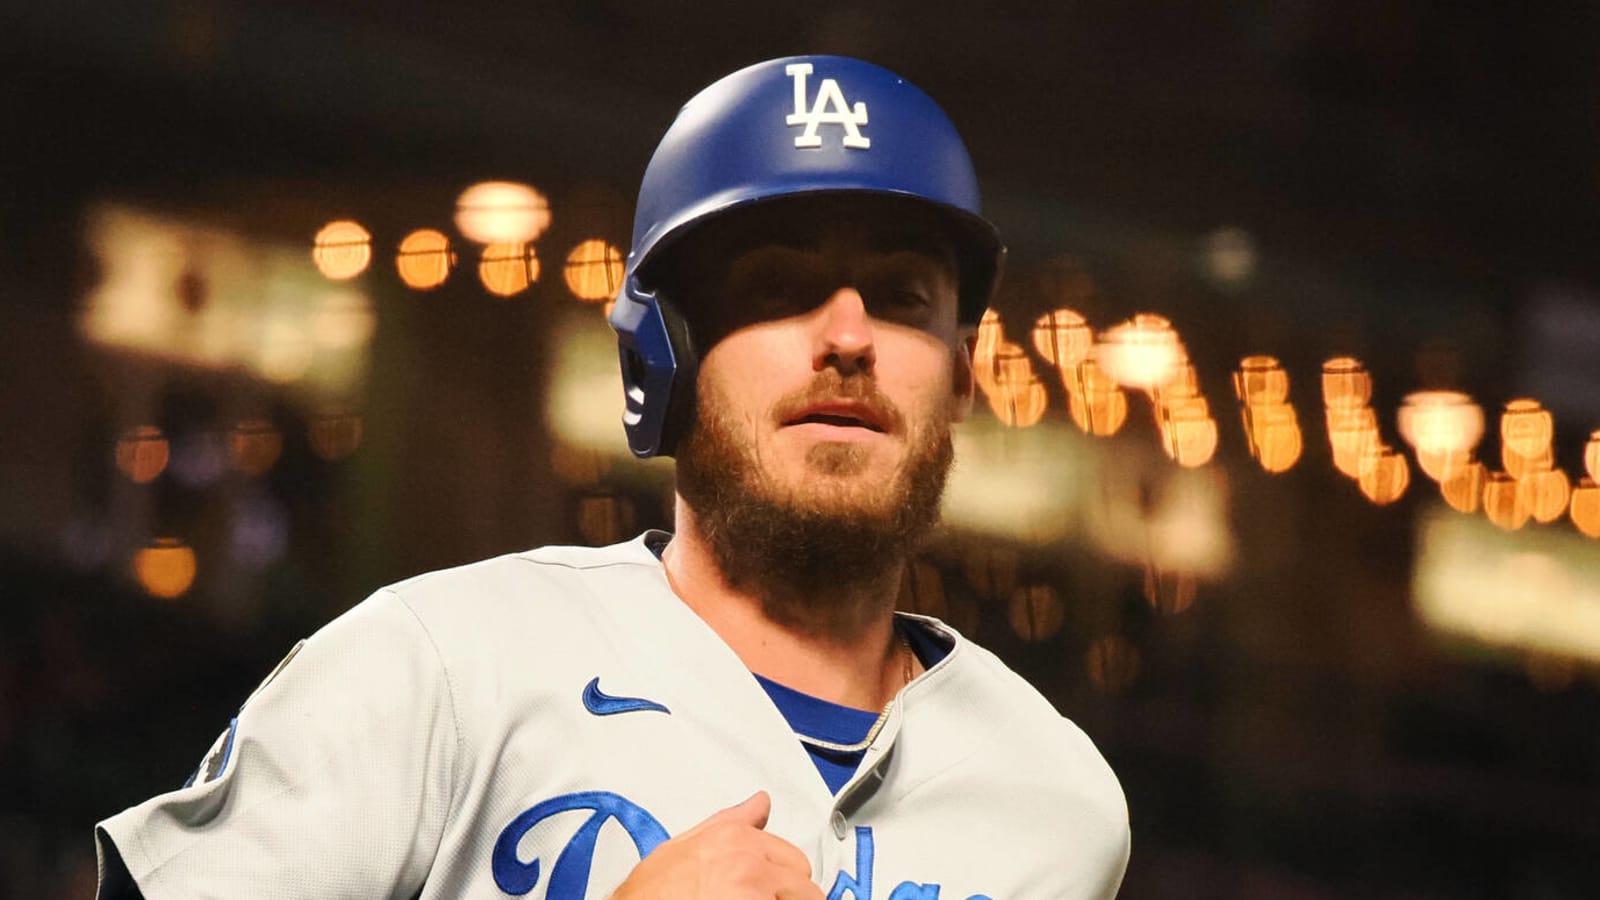 Arizona native Cody Bellinger wins NL Rookie of the Year for